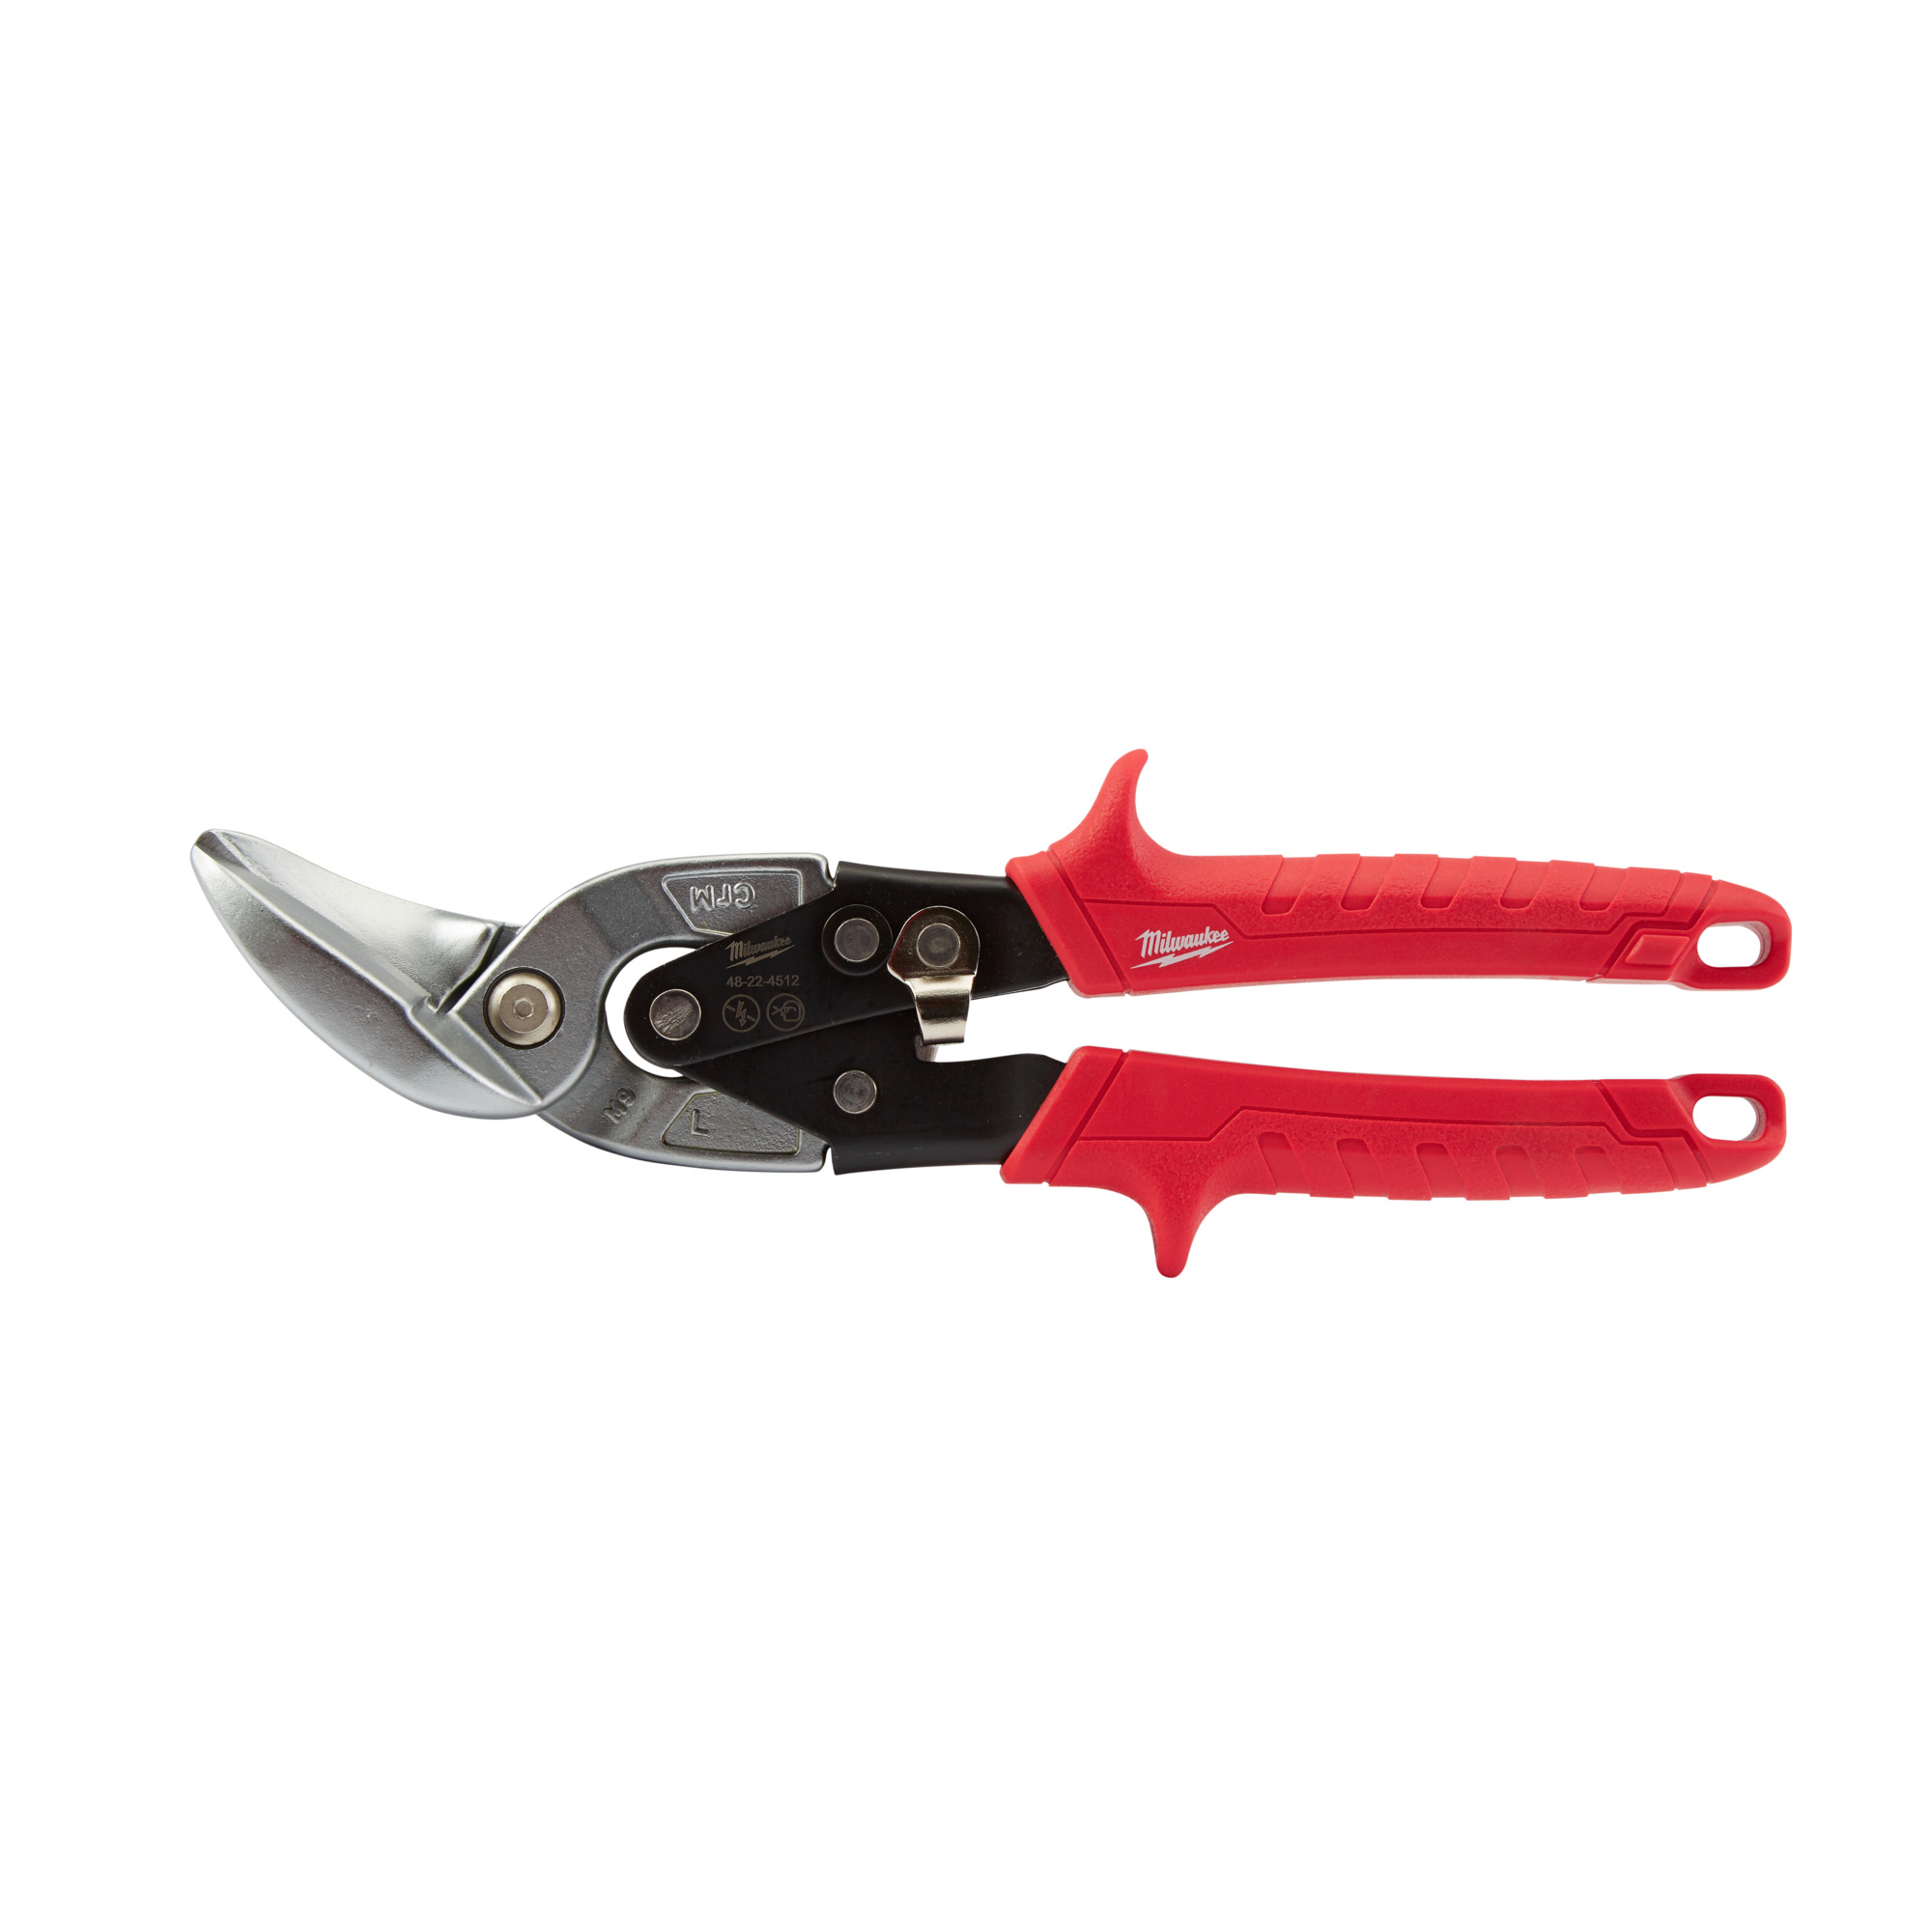 Milwaukee, Left Cutting Offset Aviation Snips, Blade Size 5 in, Tool Length 11.25 in, Model 48-22-4512